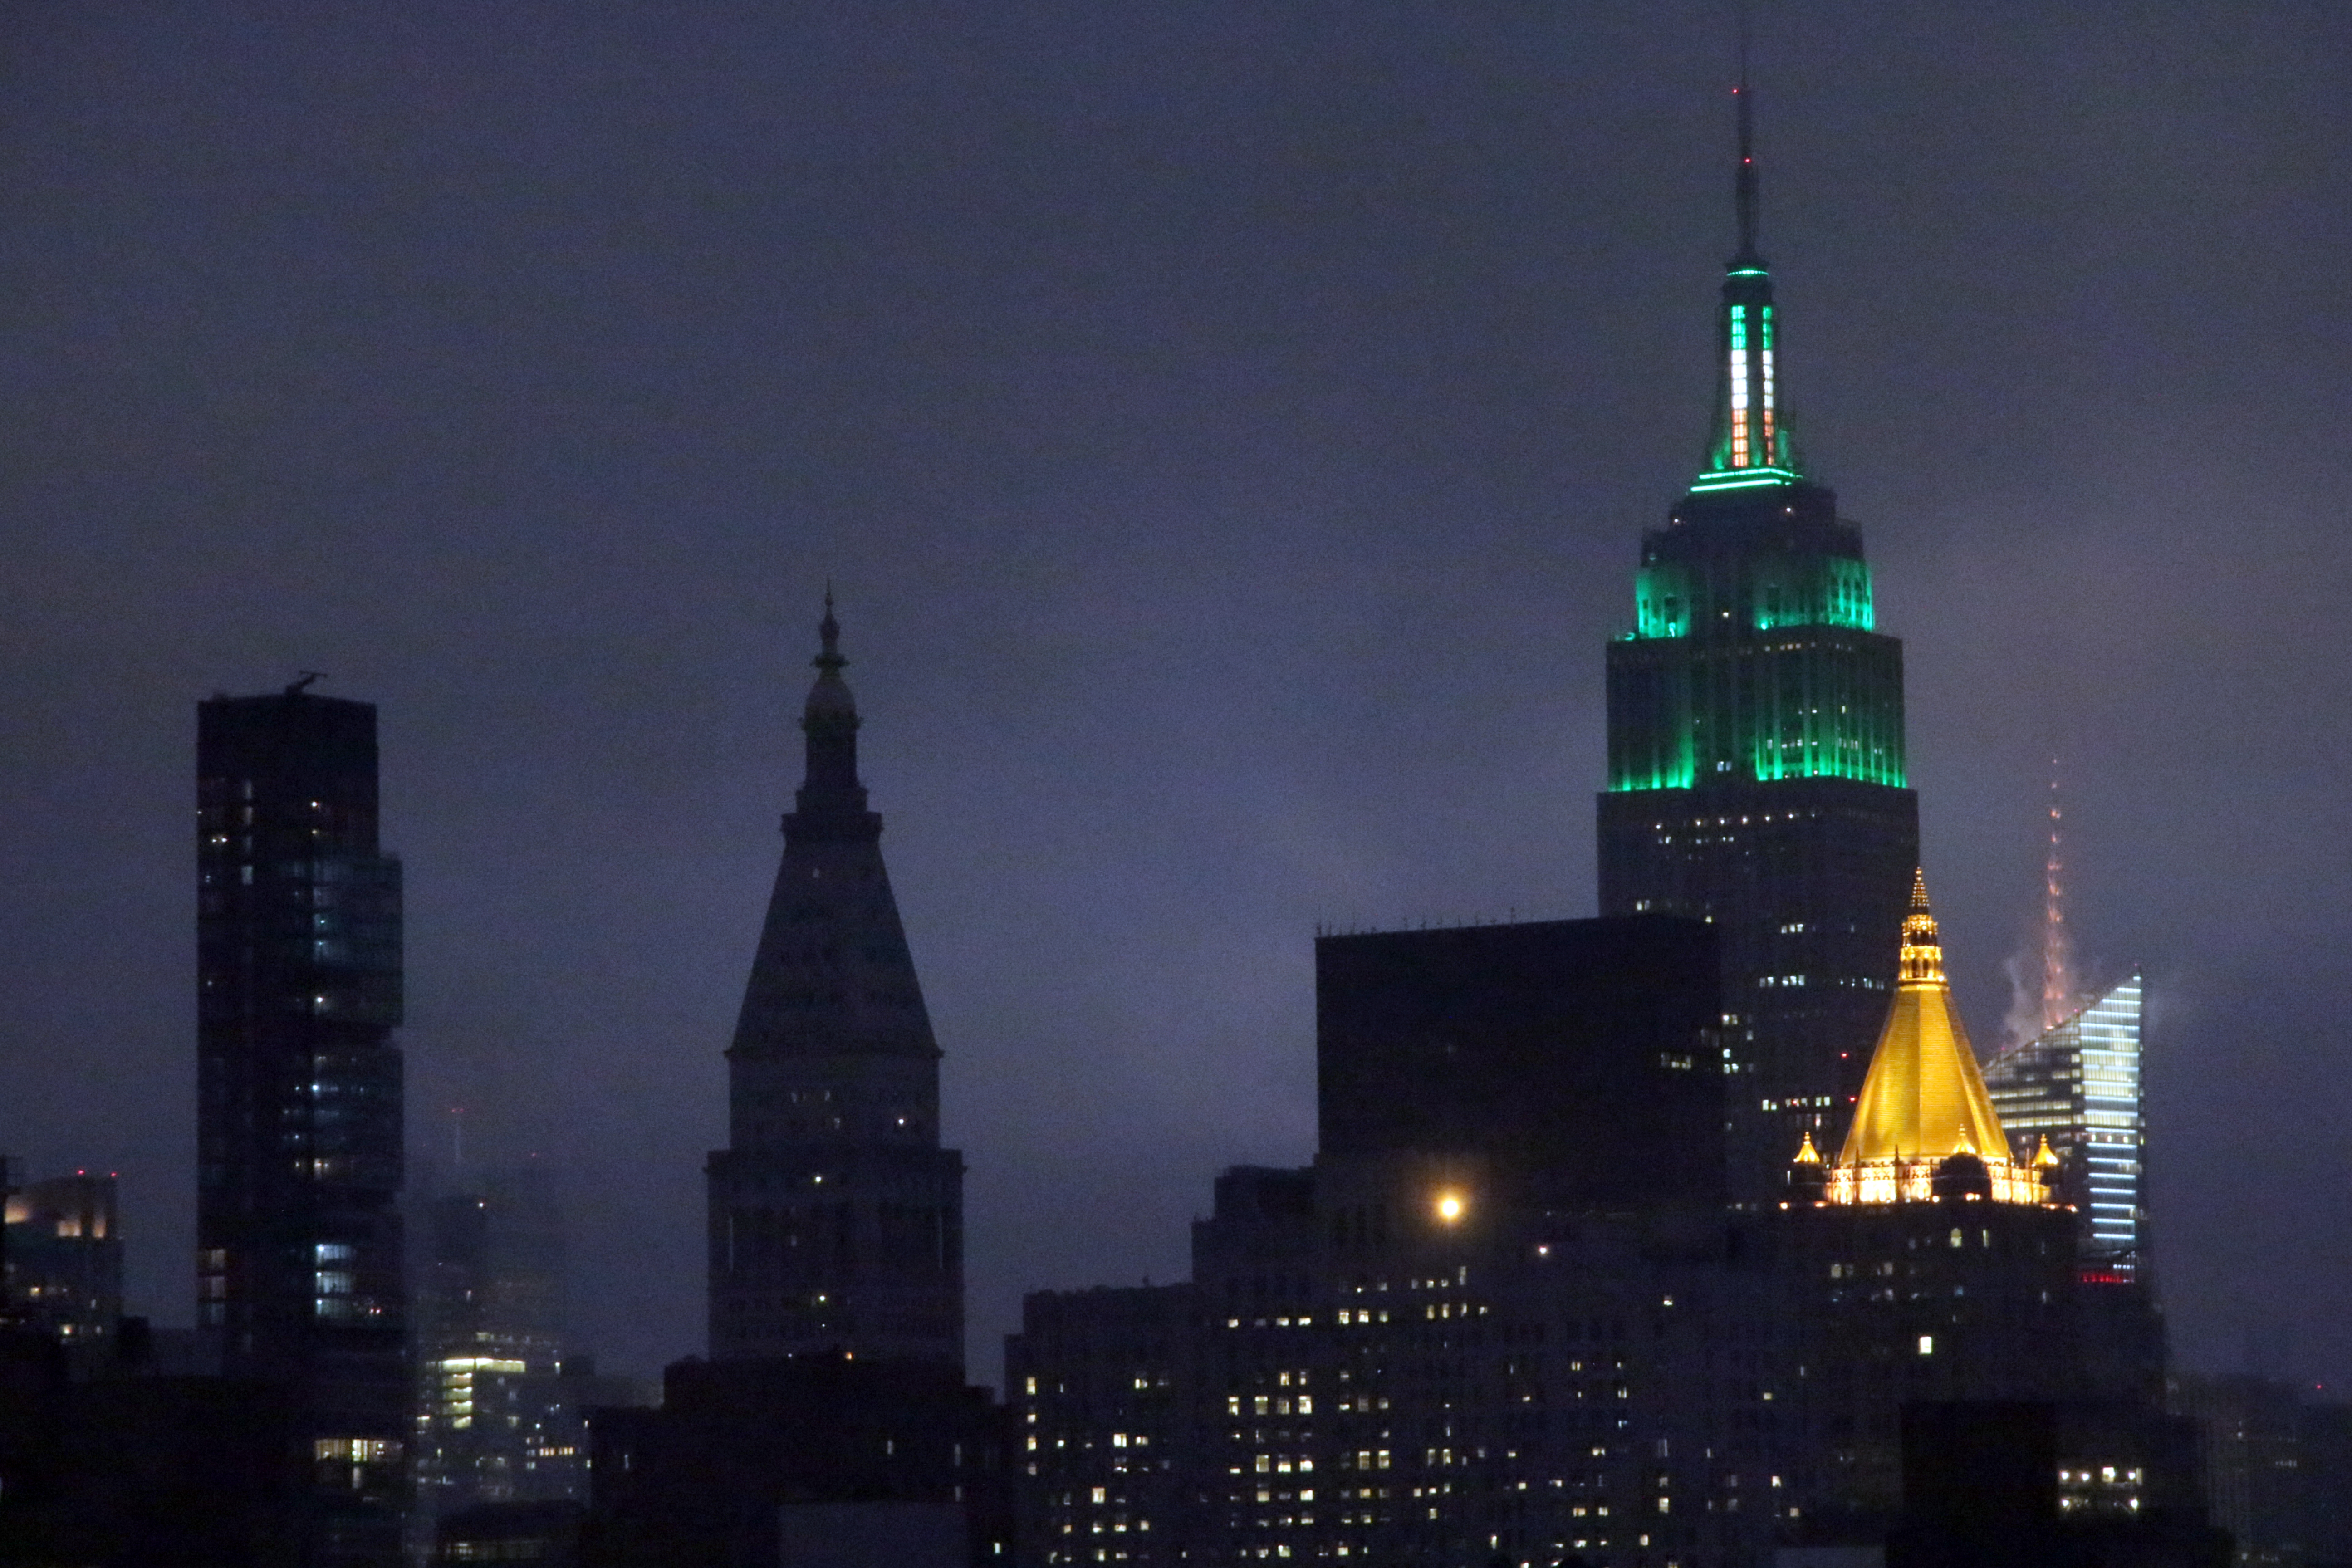 Empire State Building curiously joins Philadelphia's celebration of Eagles'  NFC championship